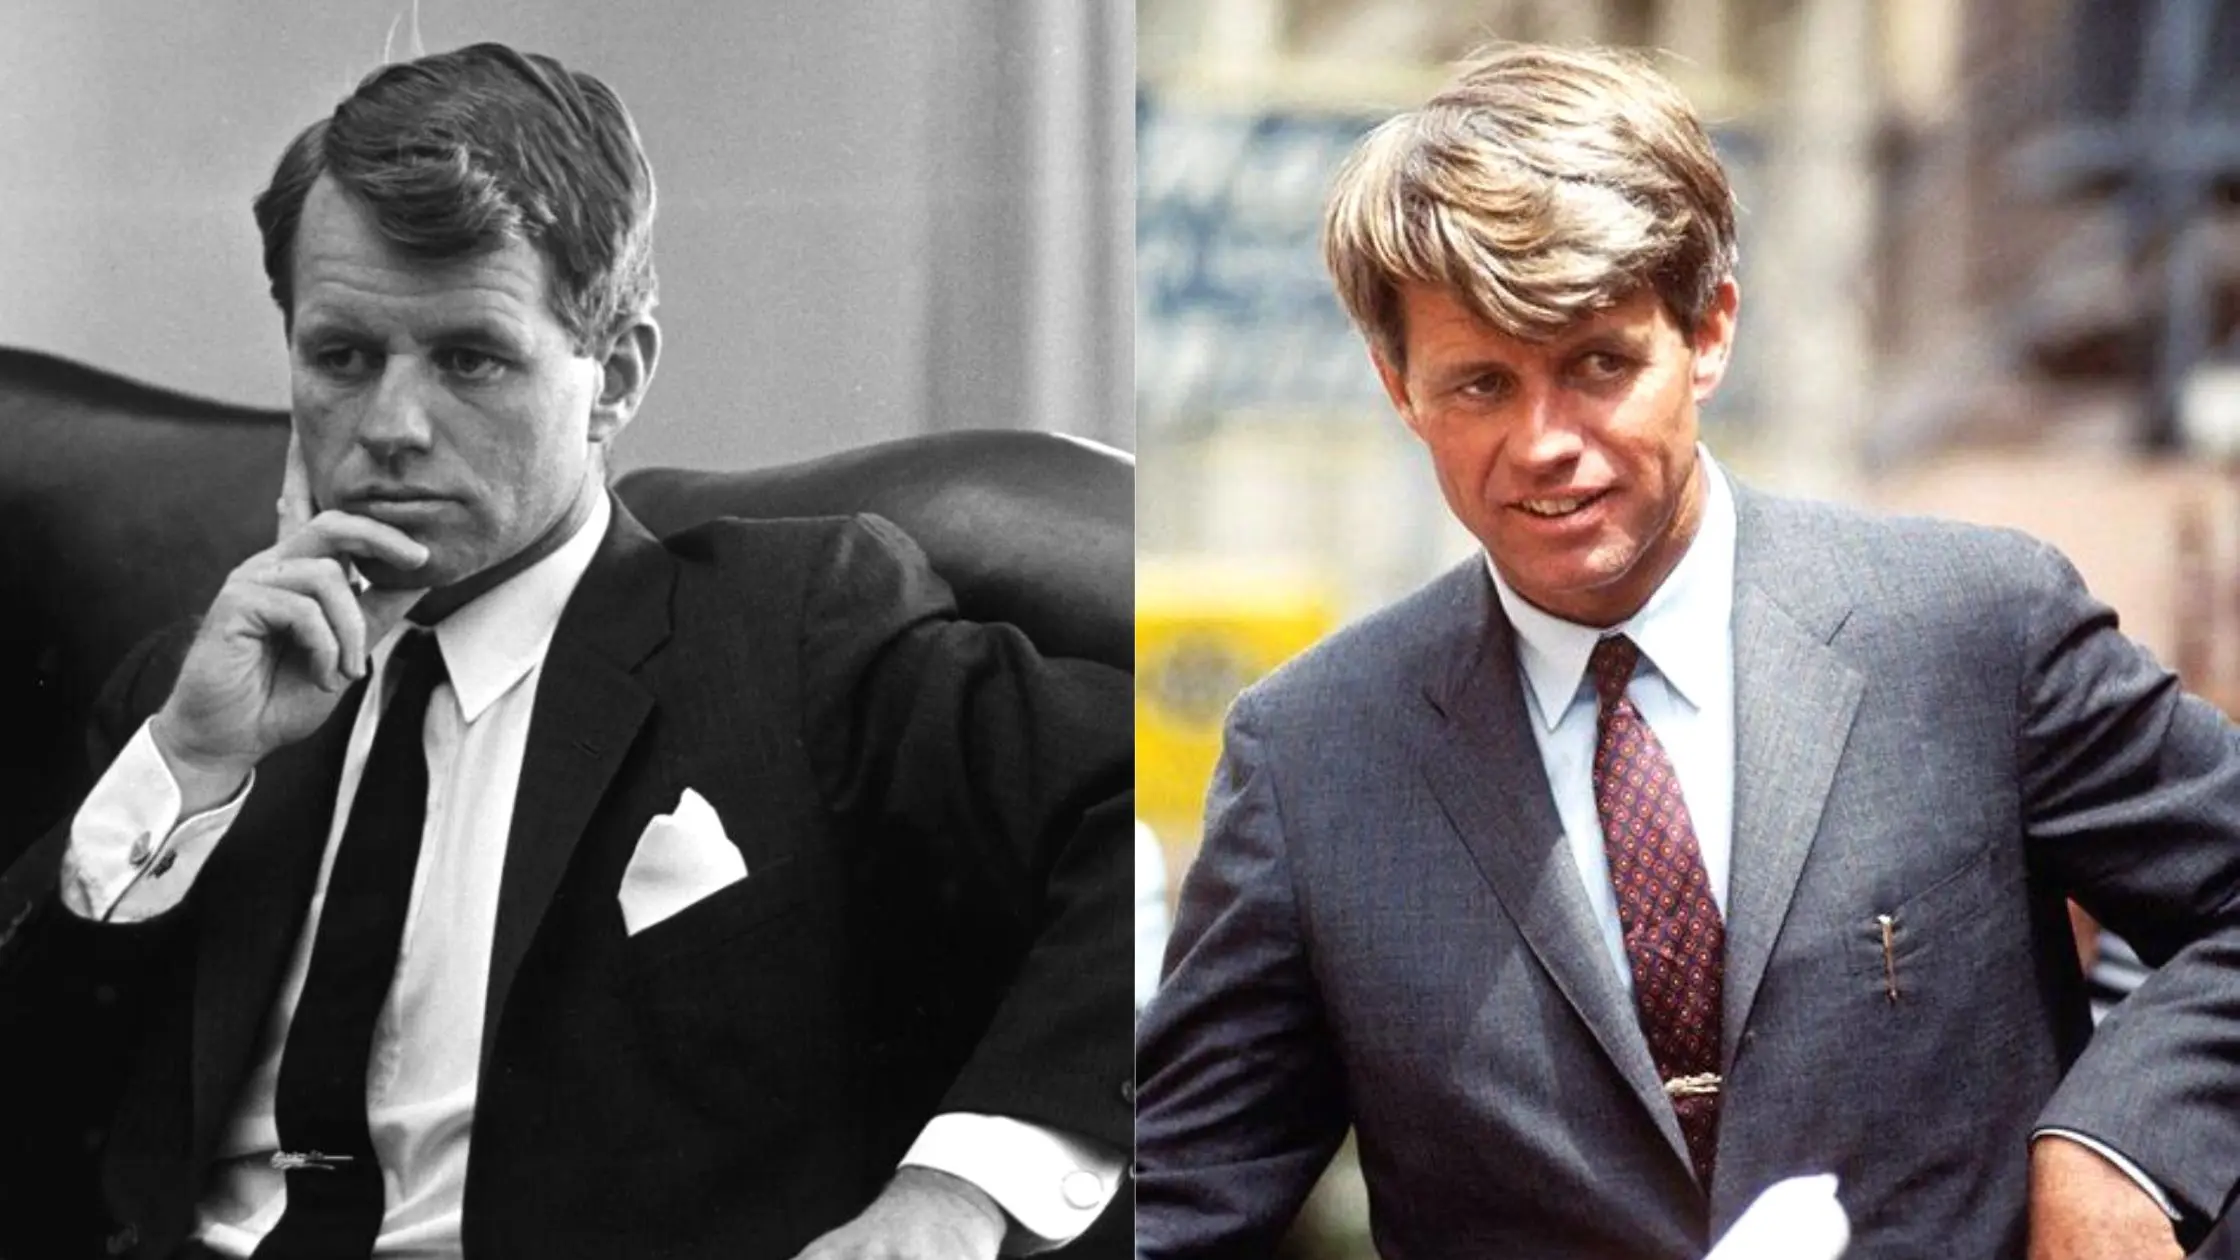 Education And Professional Life Of Robert F Kennedy